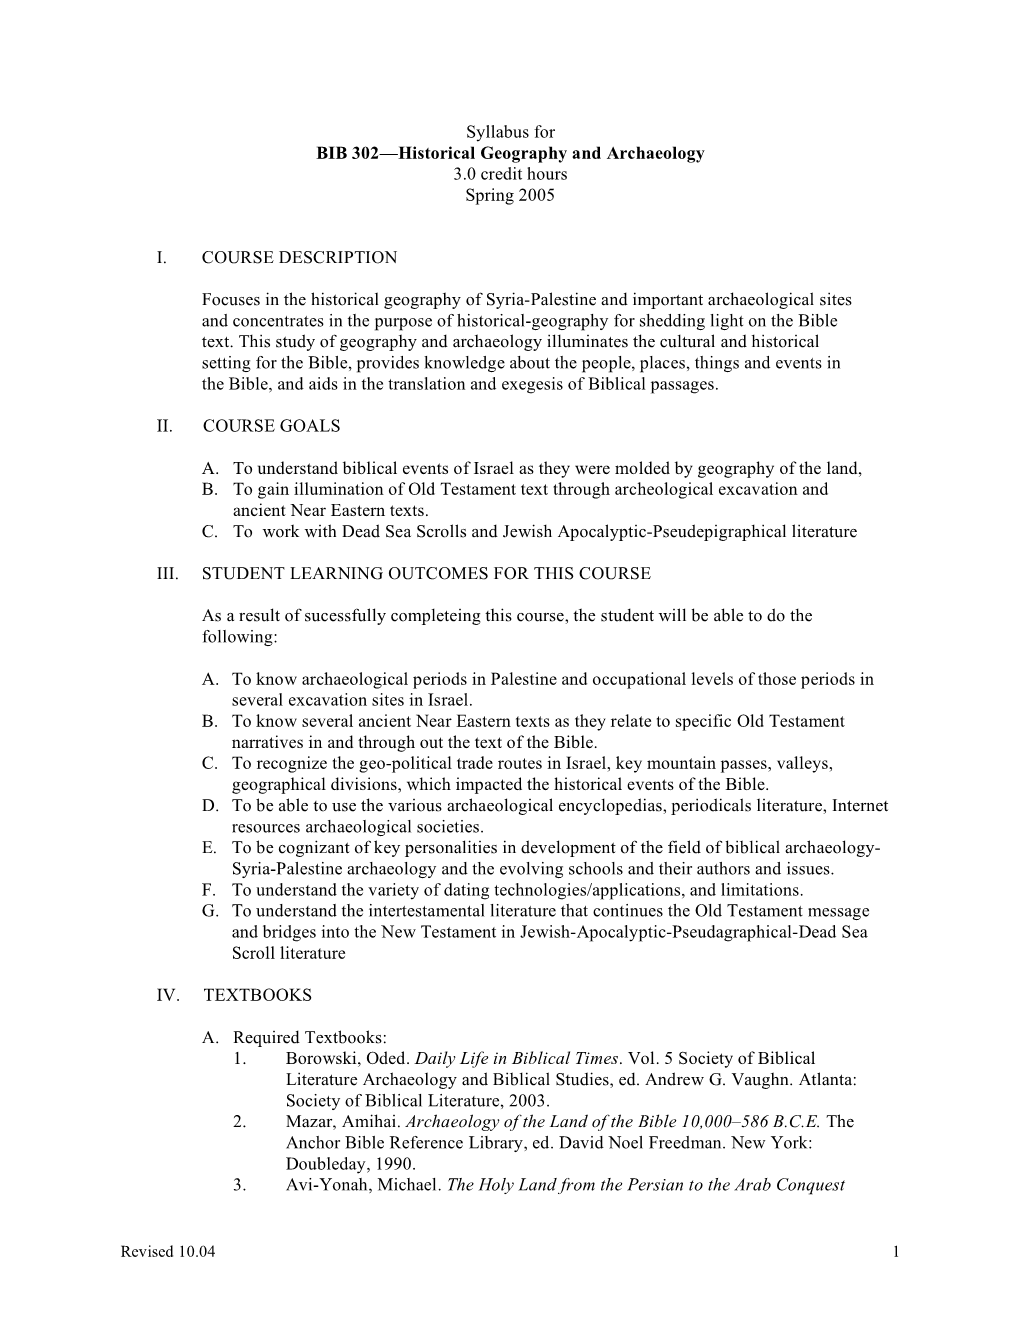 Syllabus for BIB 302—Historical Geography and Archaeology 3.0 Credit Hours Spring 2005